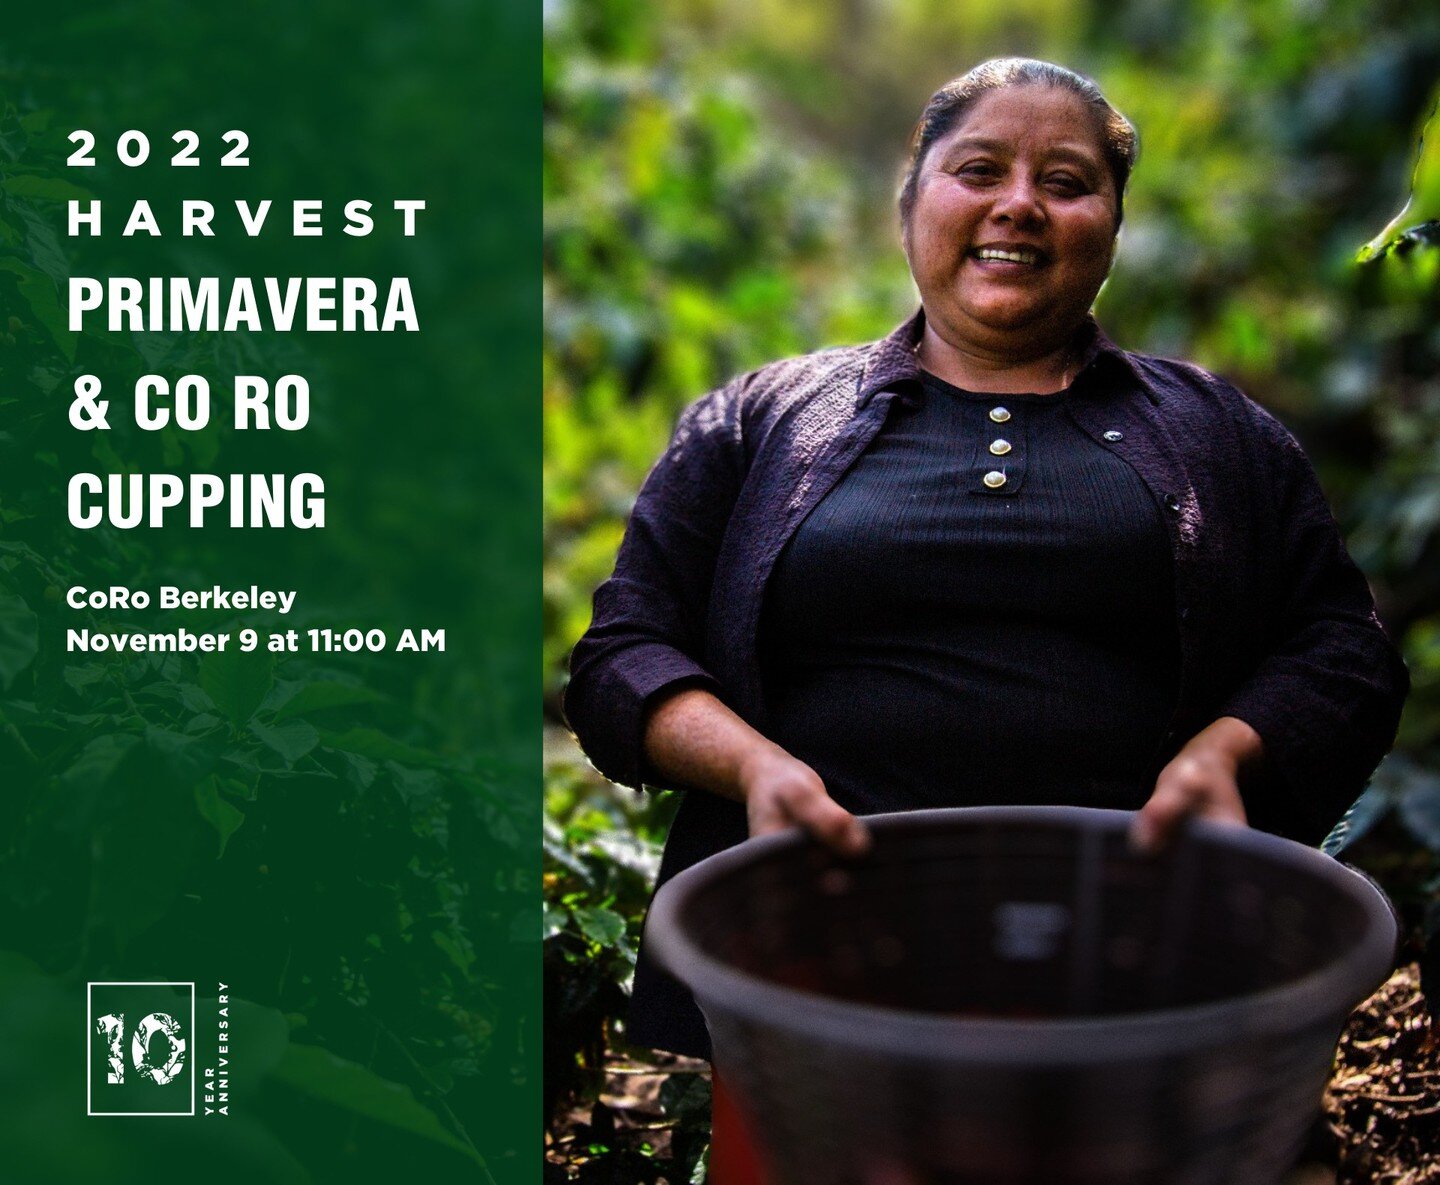 CoRo is super excited to have @primavera.coffee come and host their last cupping of 2022 before we move into the new year! If you are a coffee professional in the bay come join us on Wednesday Nov. 9th @ 11AM!

A little about Primavera:

We&rsquo;re 